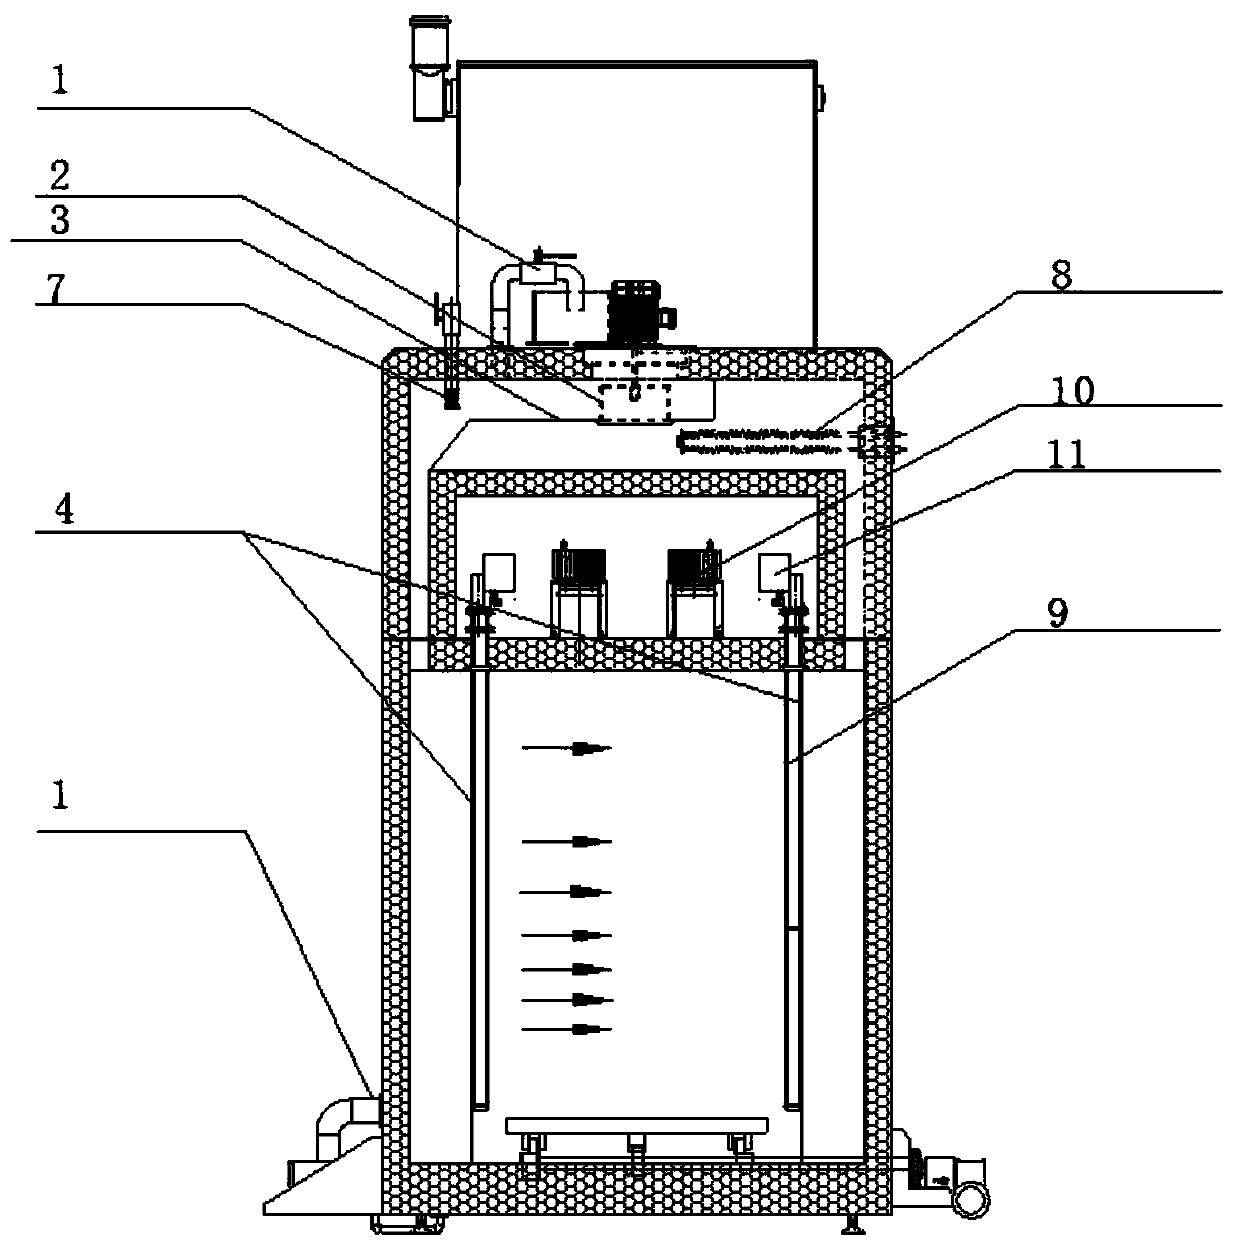 Continuous wood modification heat treatment process and system